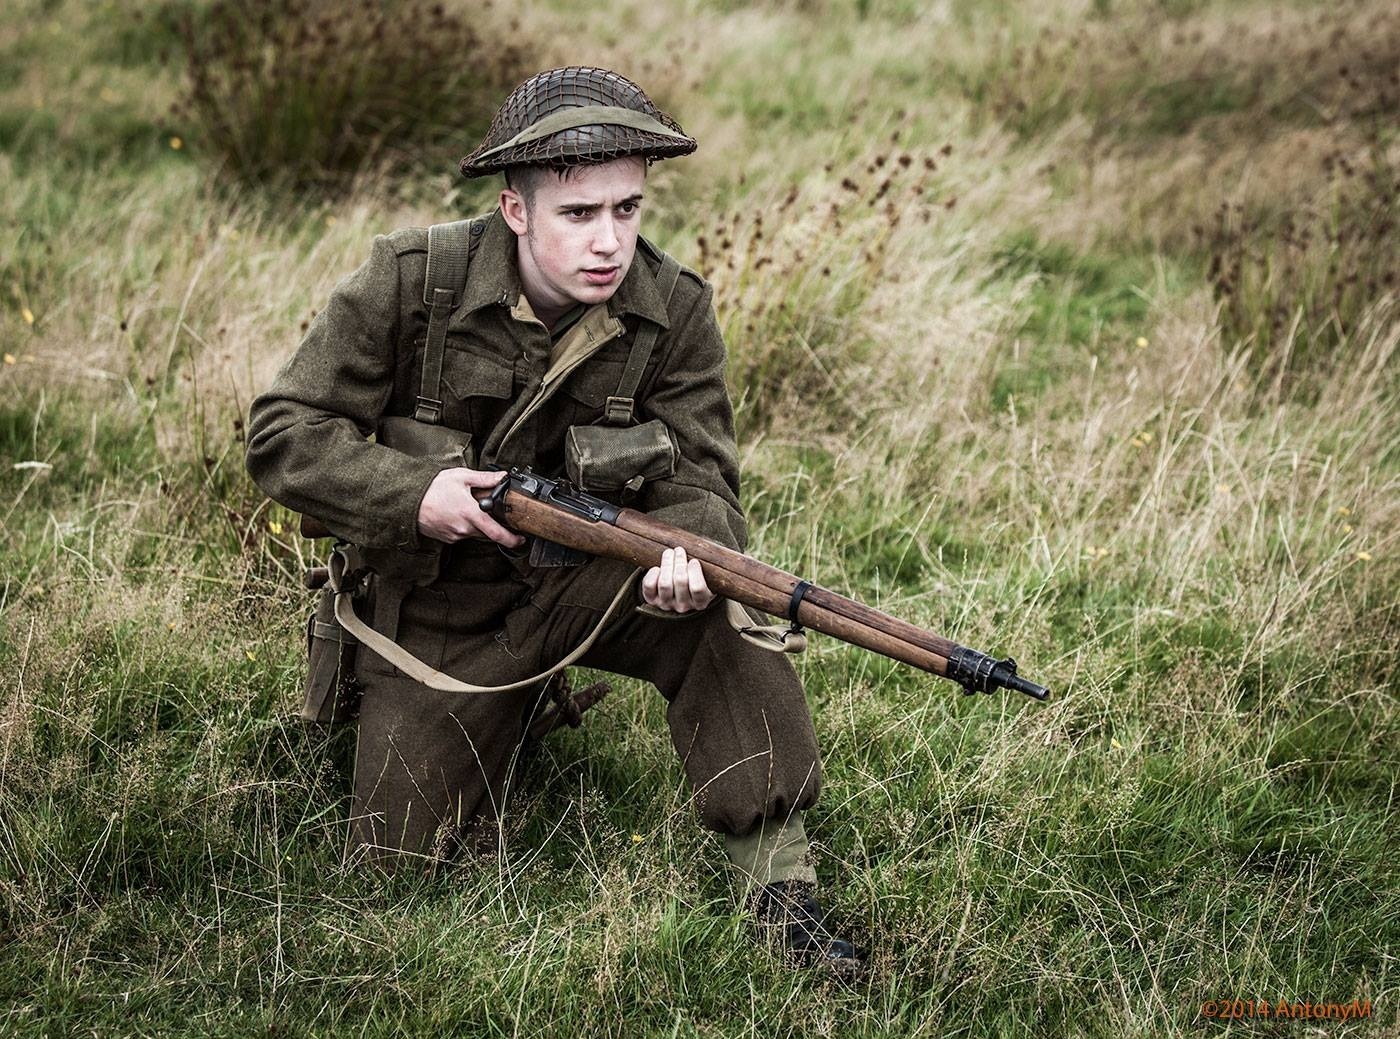 Still from WW2 film 'Our Father'